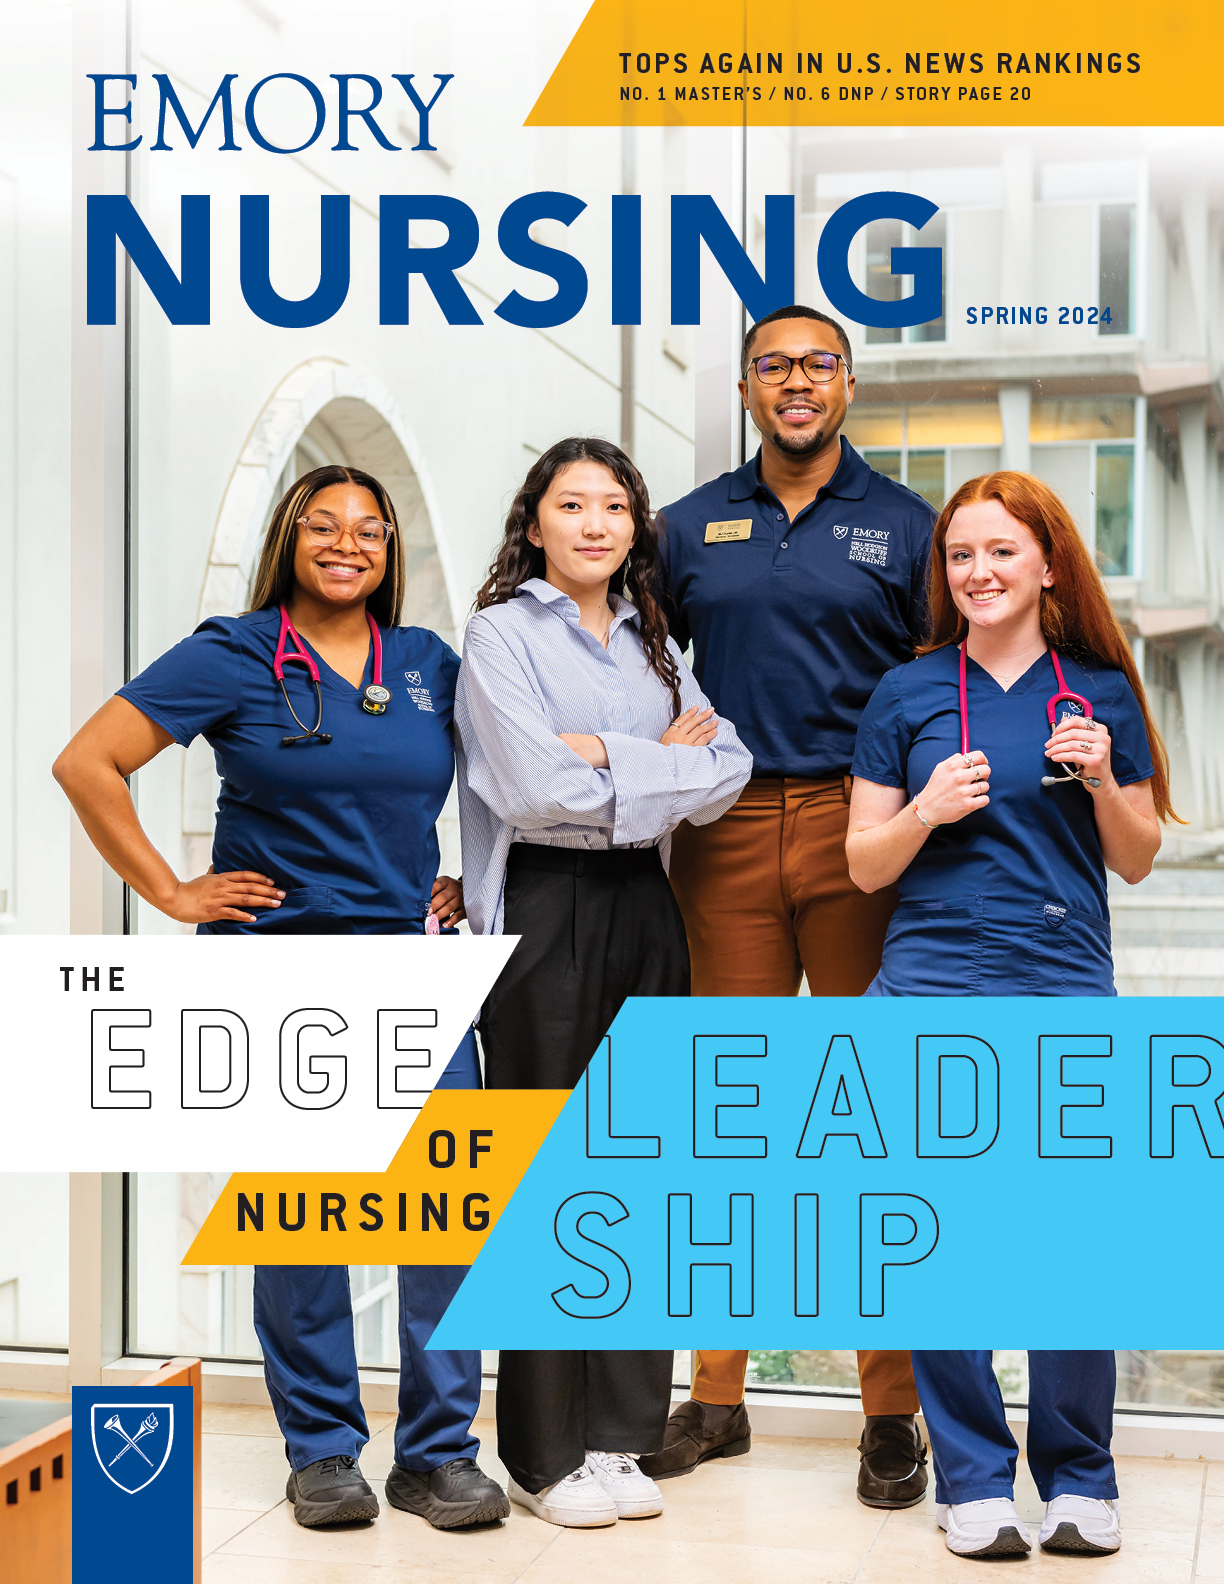 Emory Nursing Magazine cover with students on it